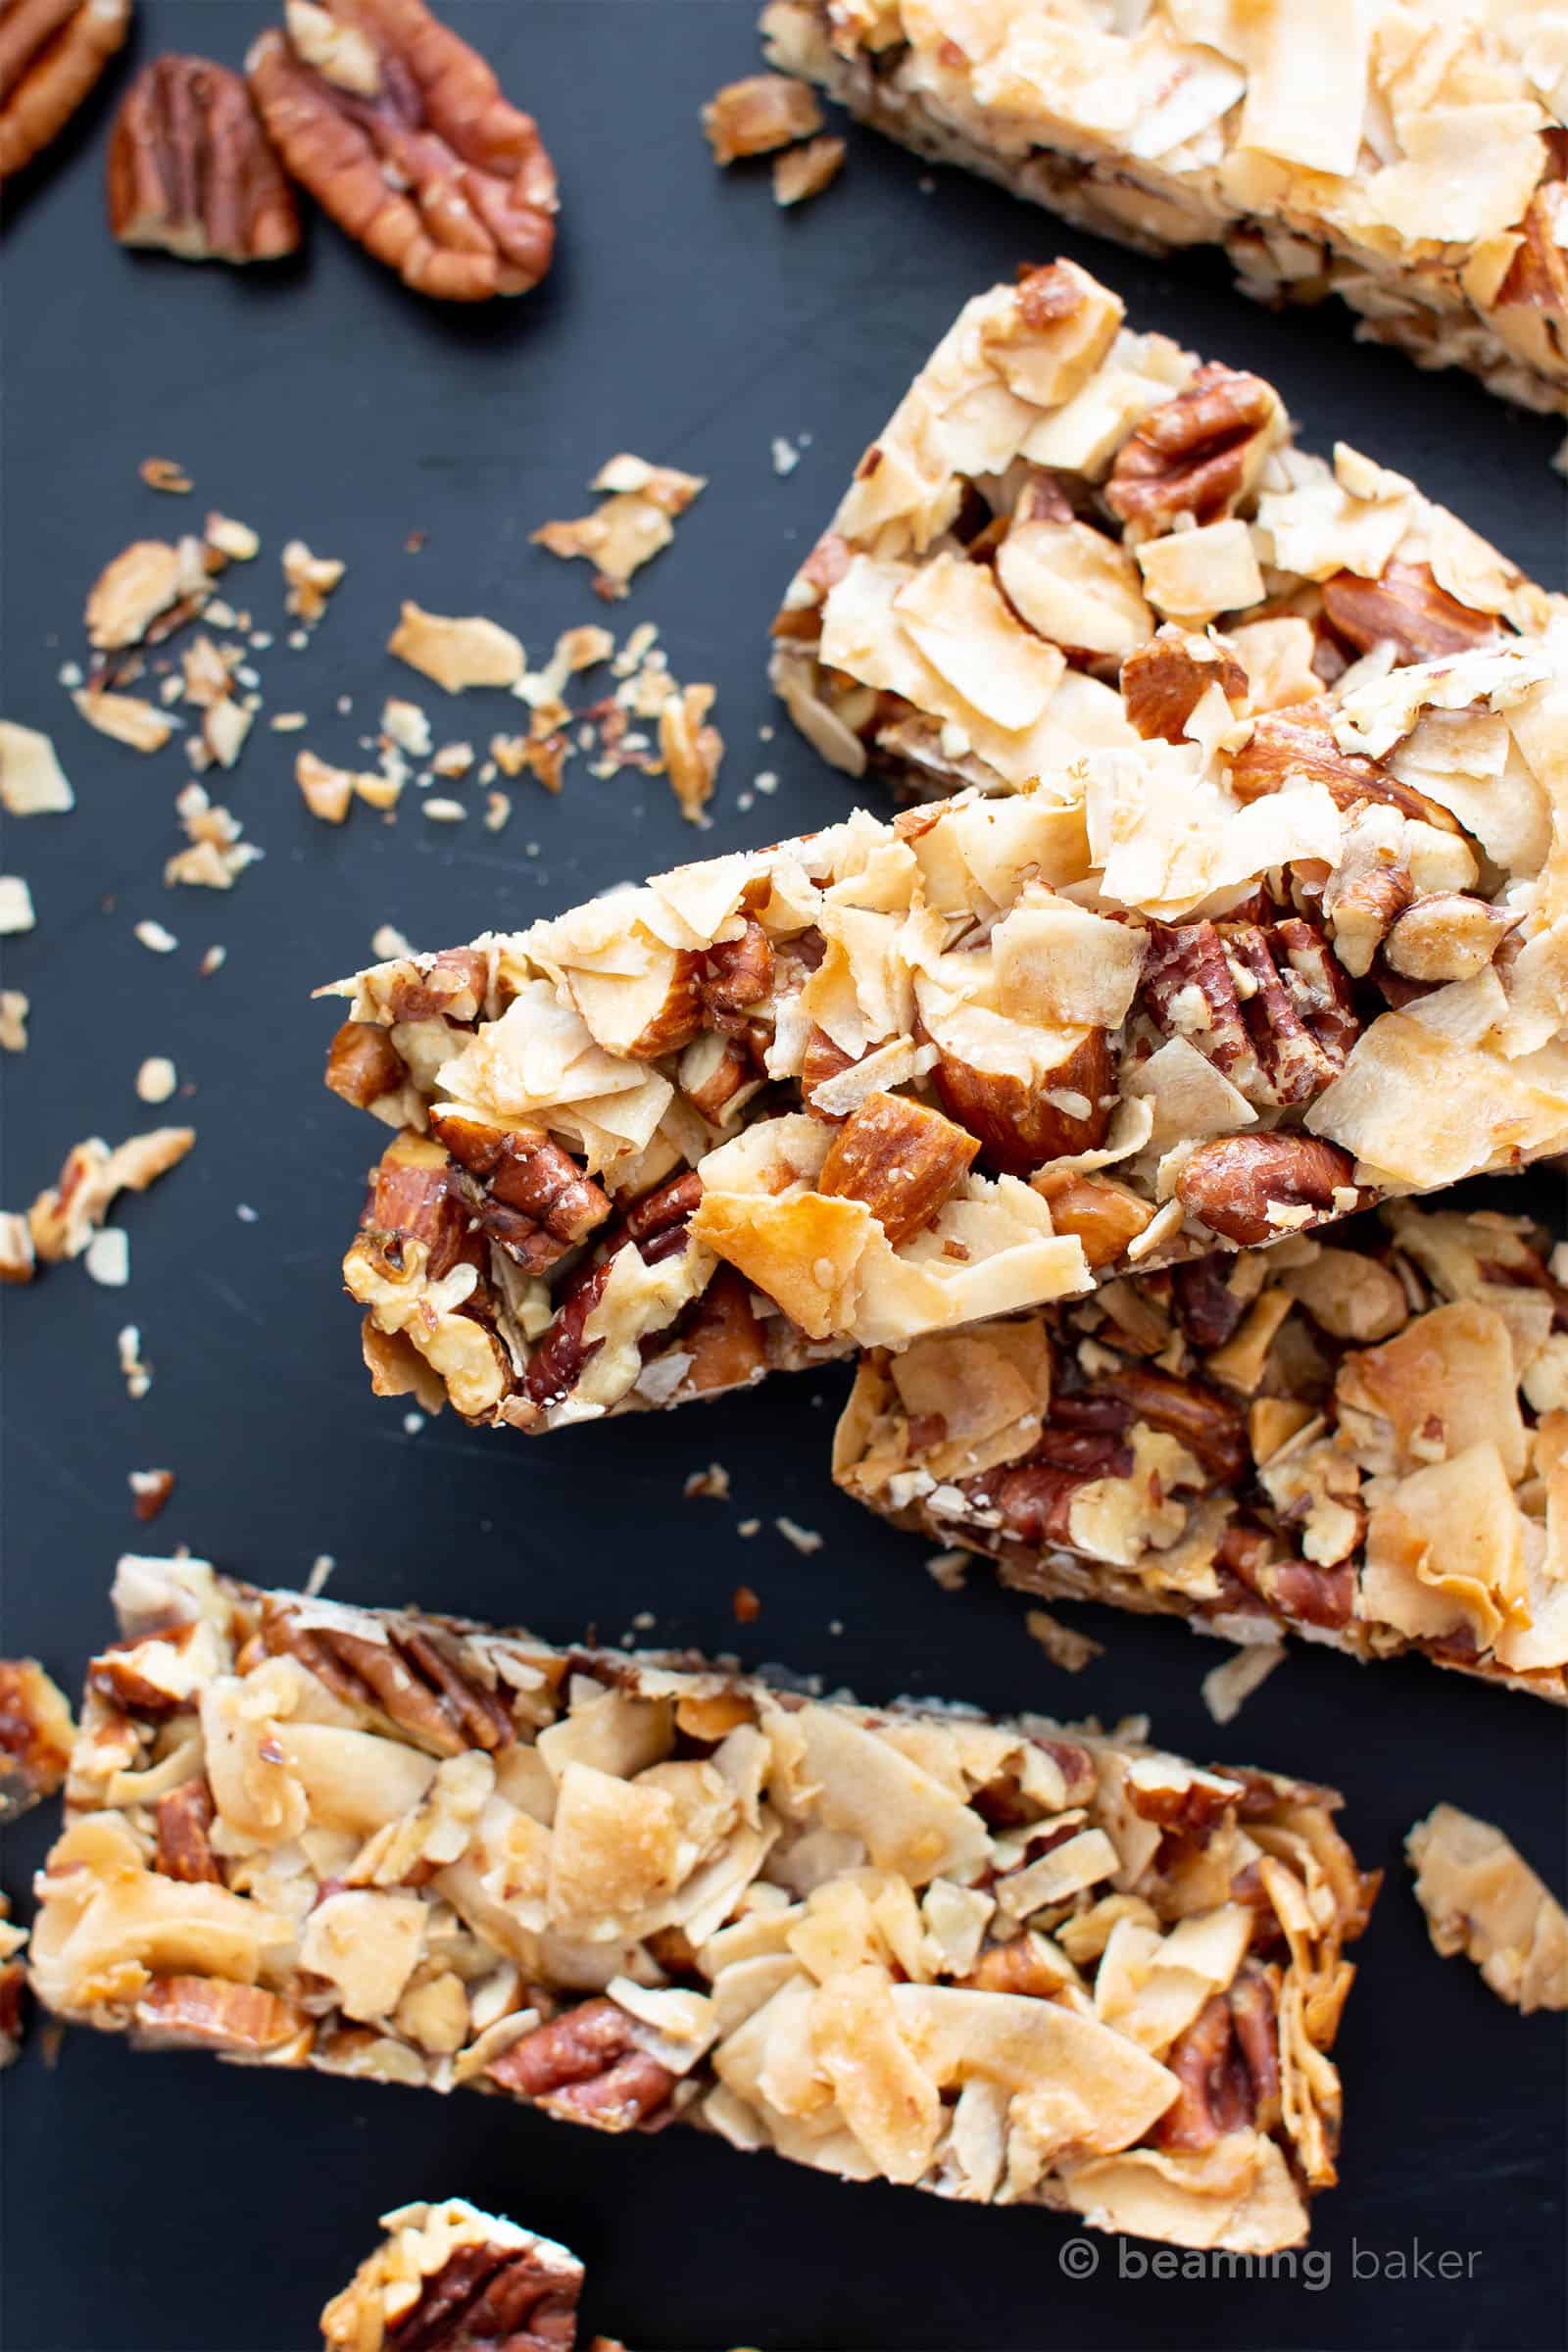 3 Ingredient Paleo KIND Bar Recipe (V, GF): this vegan paleo homemade kind bar recipe is so easy with 3 ingredients! It’s the best way to learn how to make diy copycat kind bars – easy, healthy, and prep’d in 5 minutes! #KindBars #Healthy #Vegan #Paleo | Recipe at BeamingBaker.com